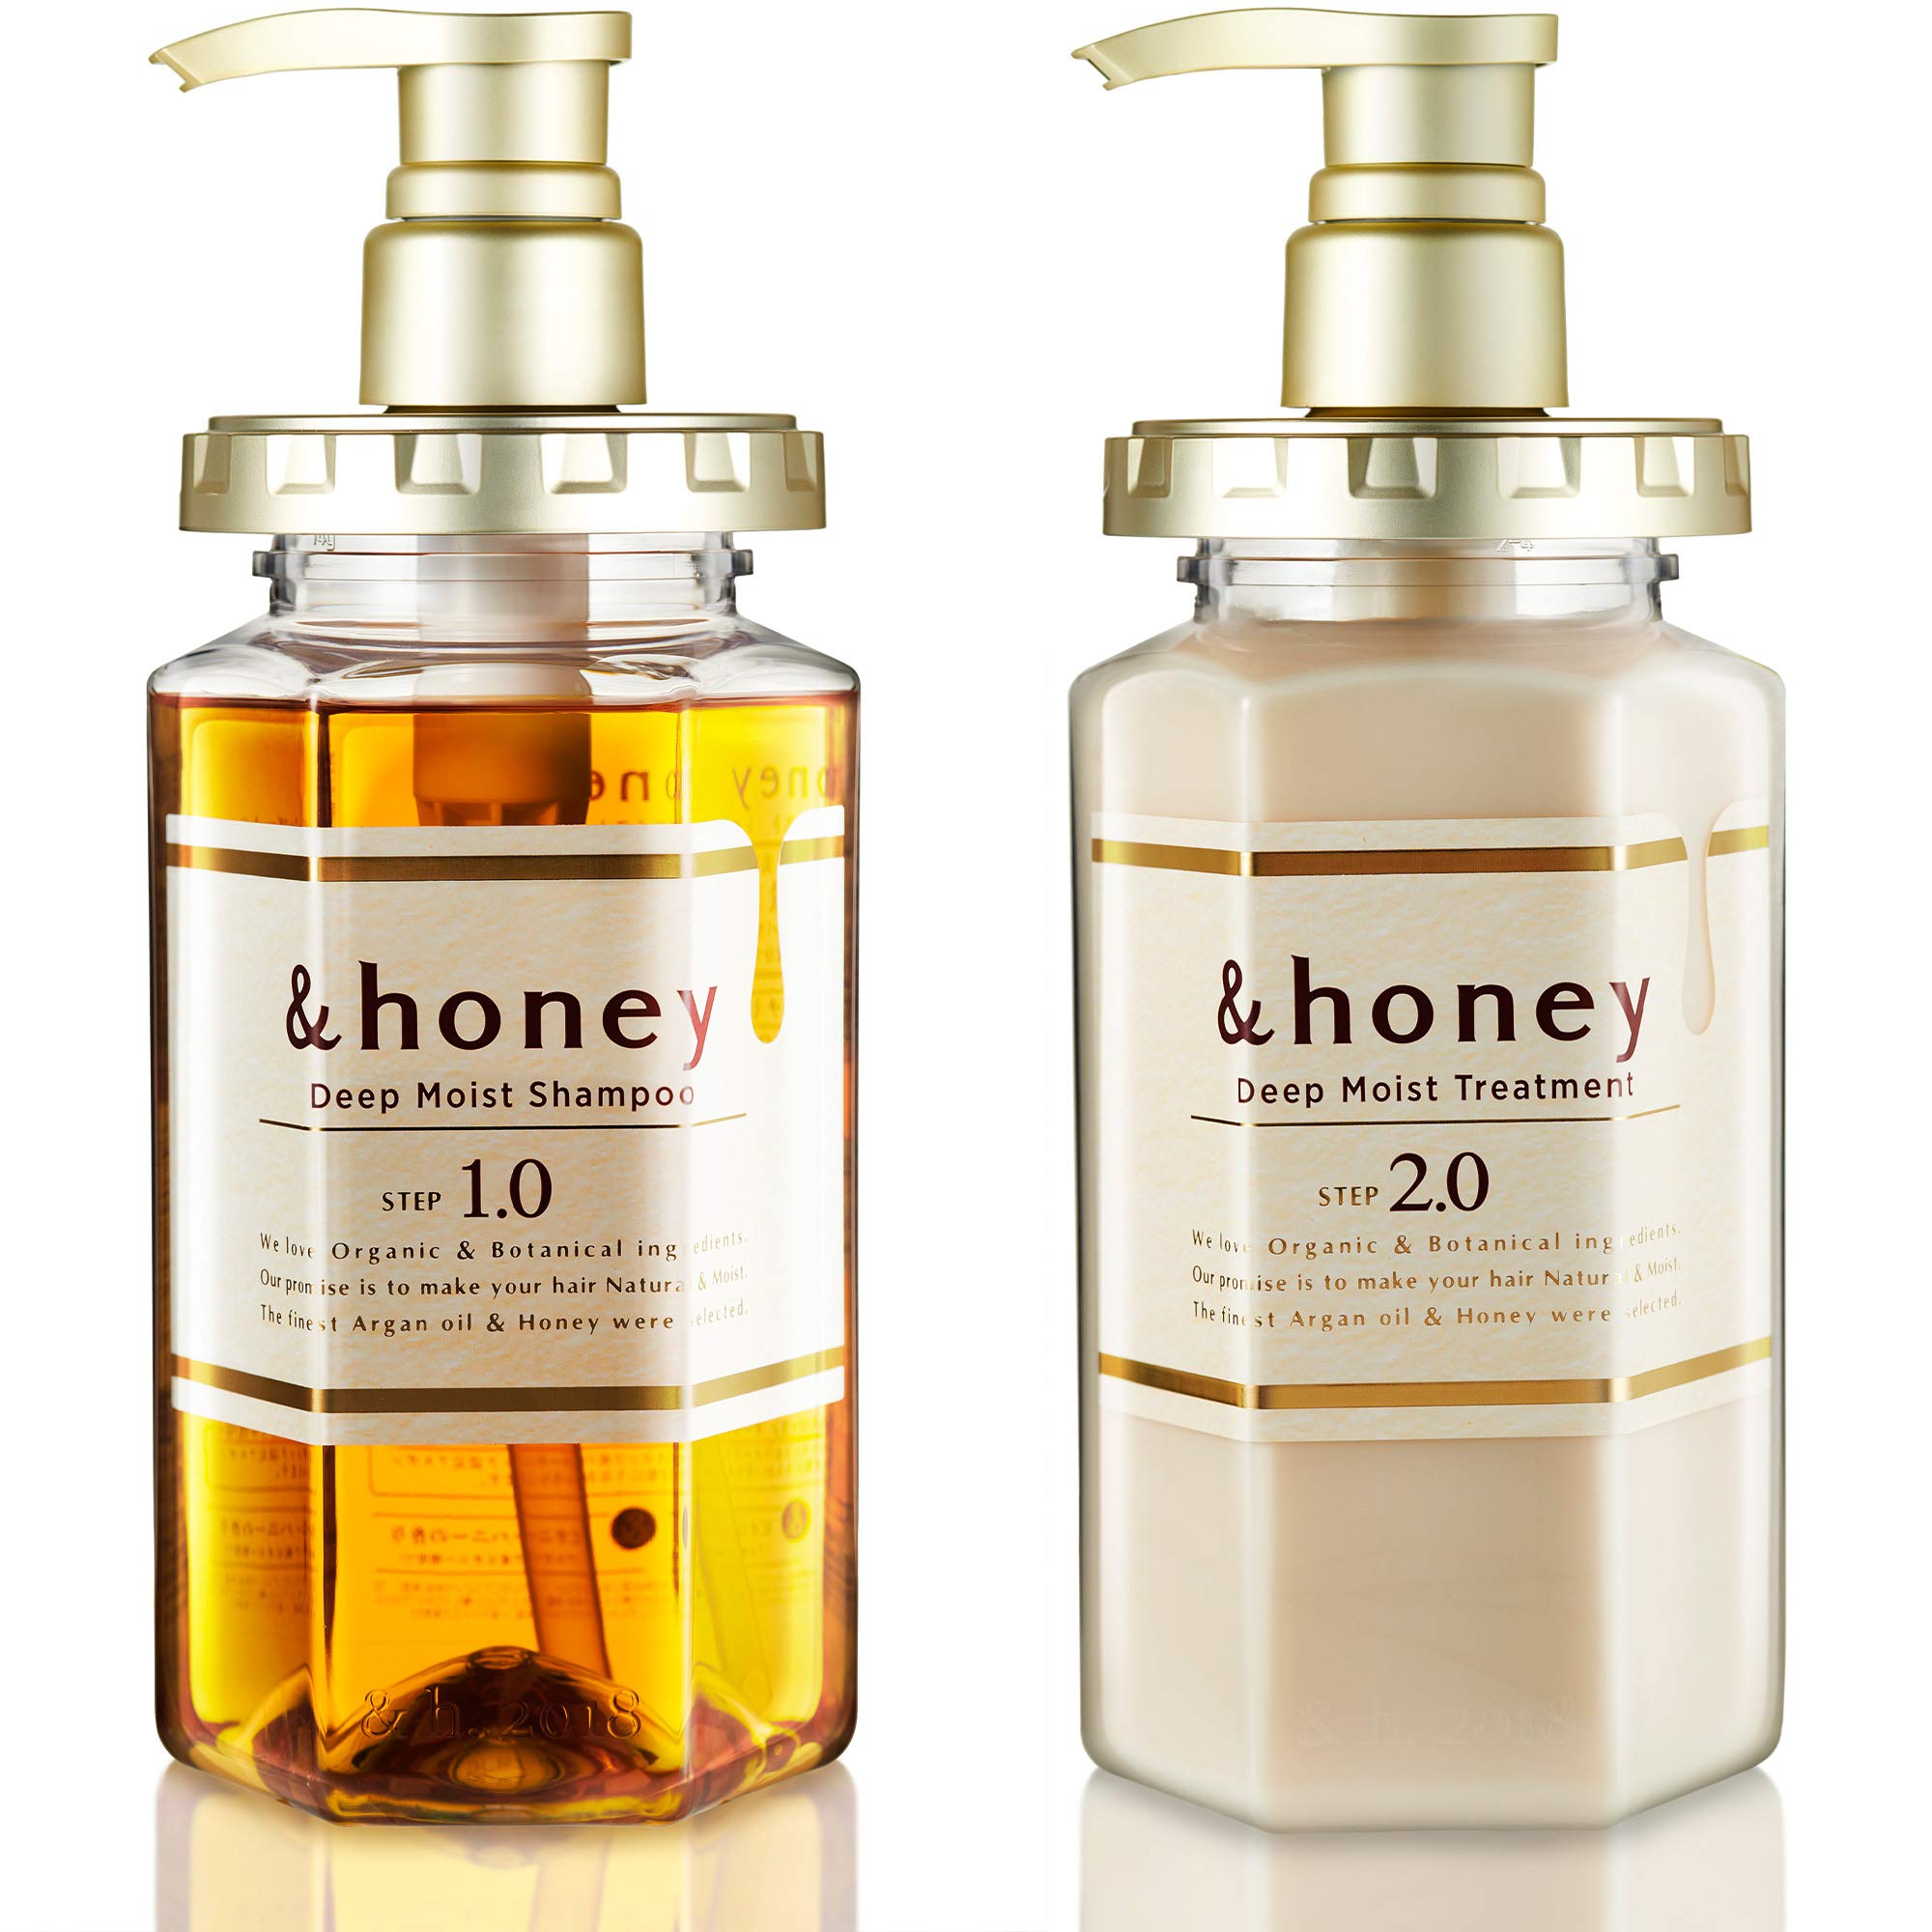 &honey Shampoo & Conditioner Set Organic Hair and Scalp Care for Intense Cleansing and Hydration - Moisture-Enhancing Wash and Protection - Ideal for Straight, Curly, Curl, Kinky, Frizzy, Treated, Col